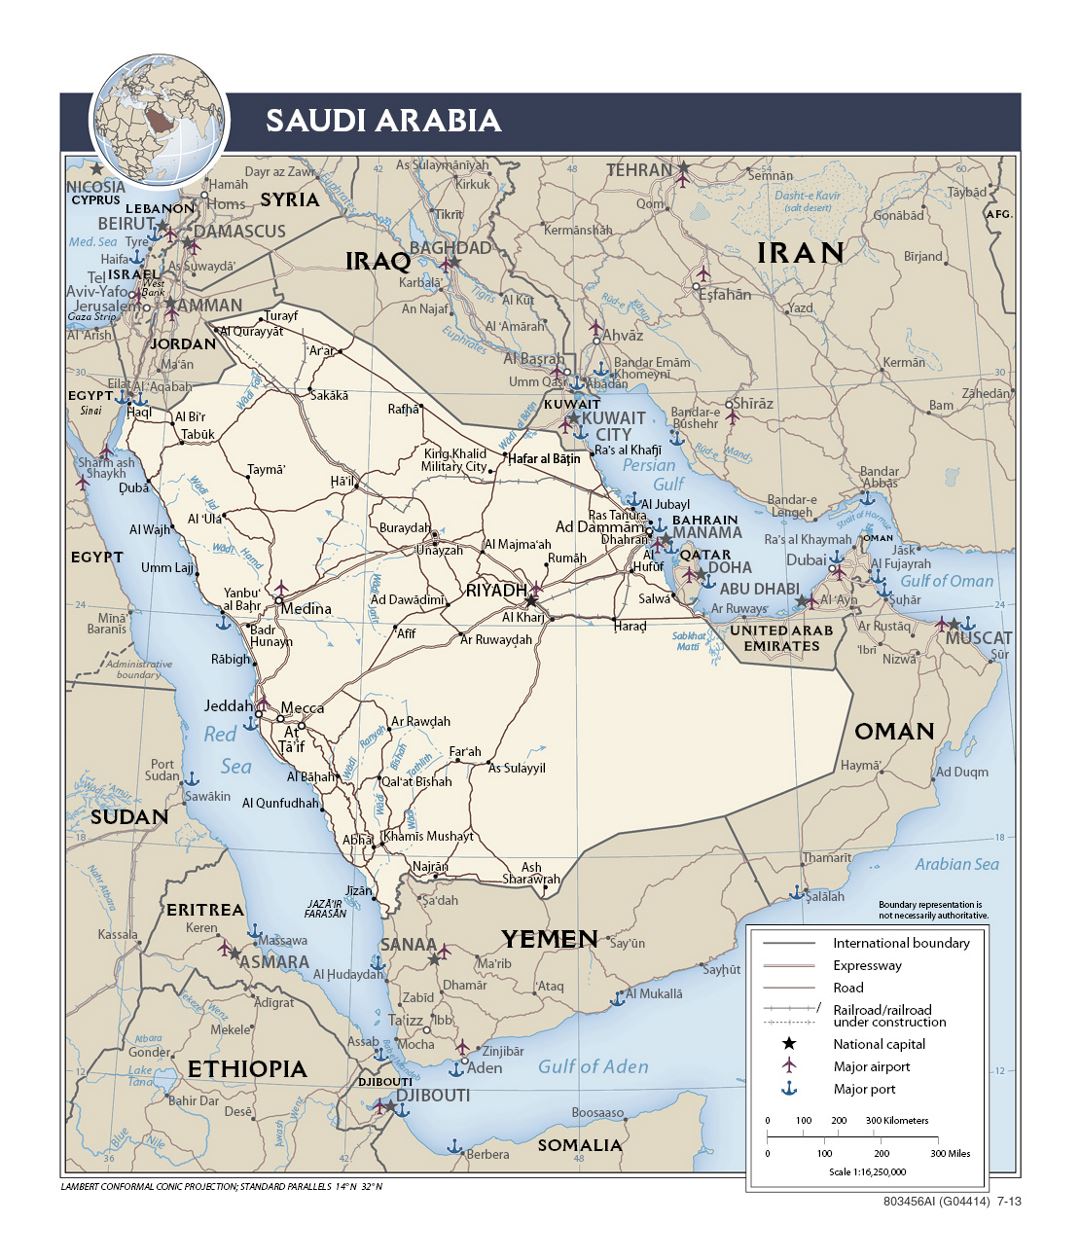 Detailed political map of Saudi Arabia with roads, railroads, ports, airports and major cities - 2013